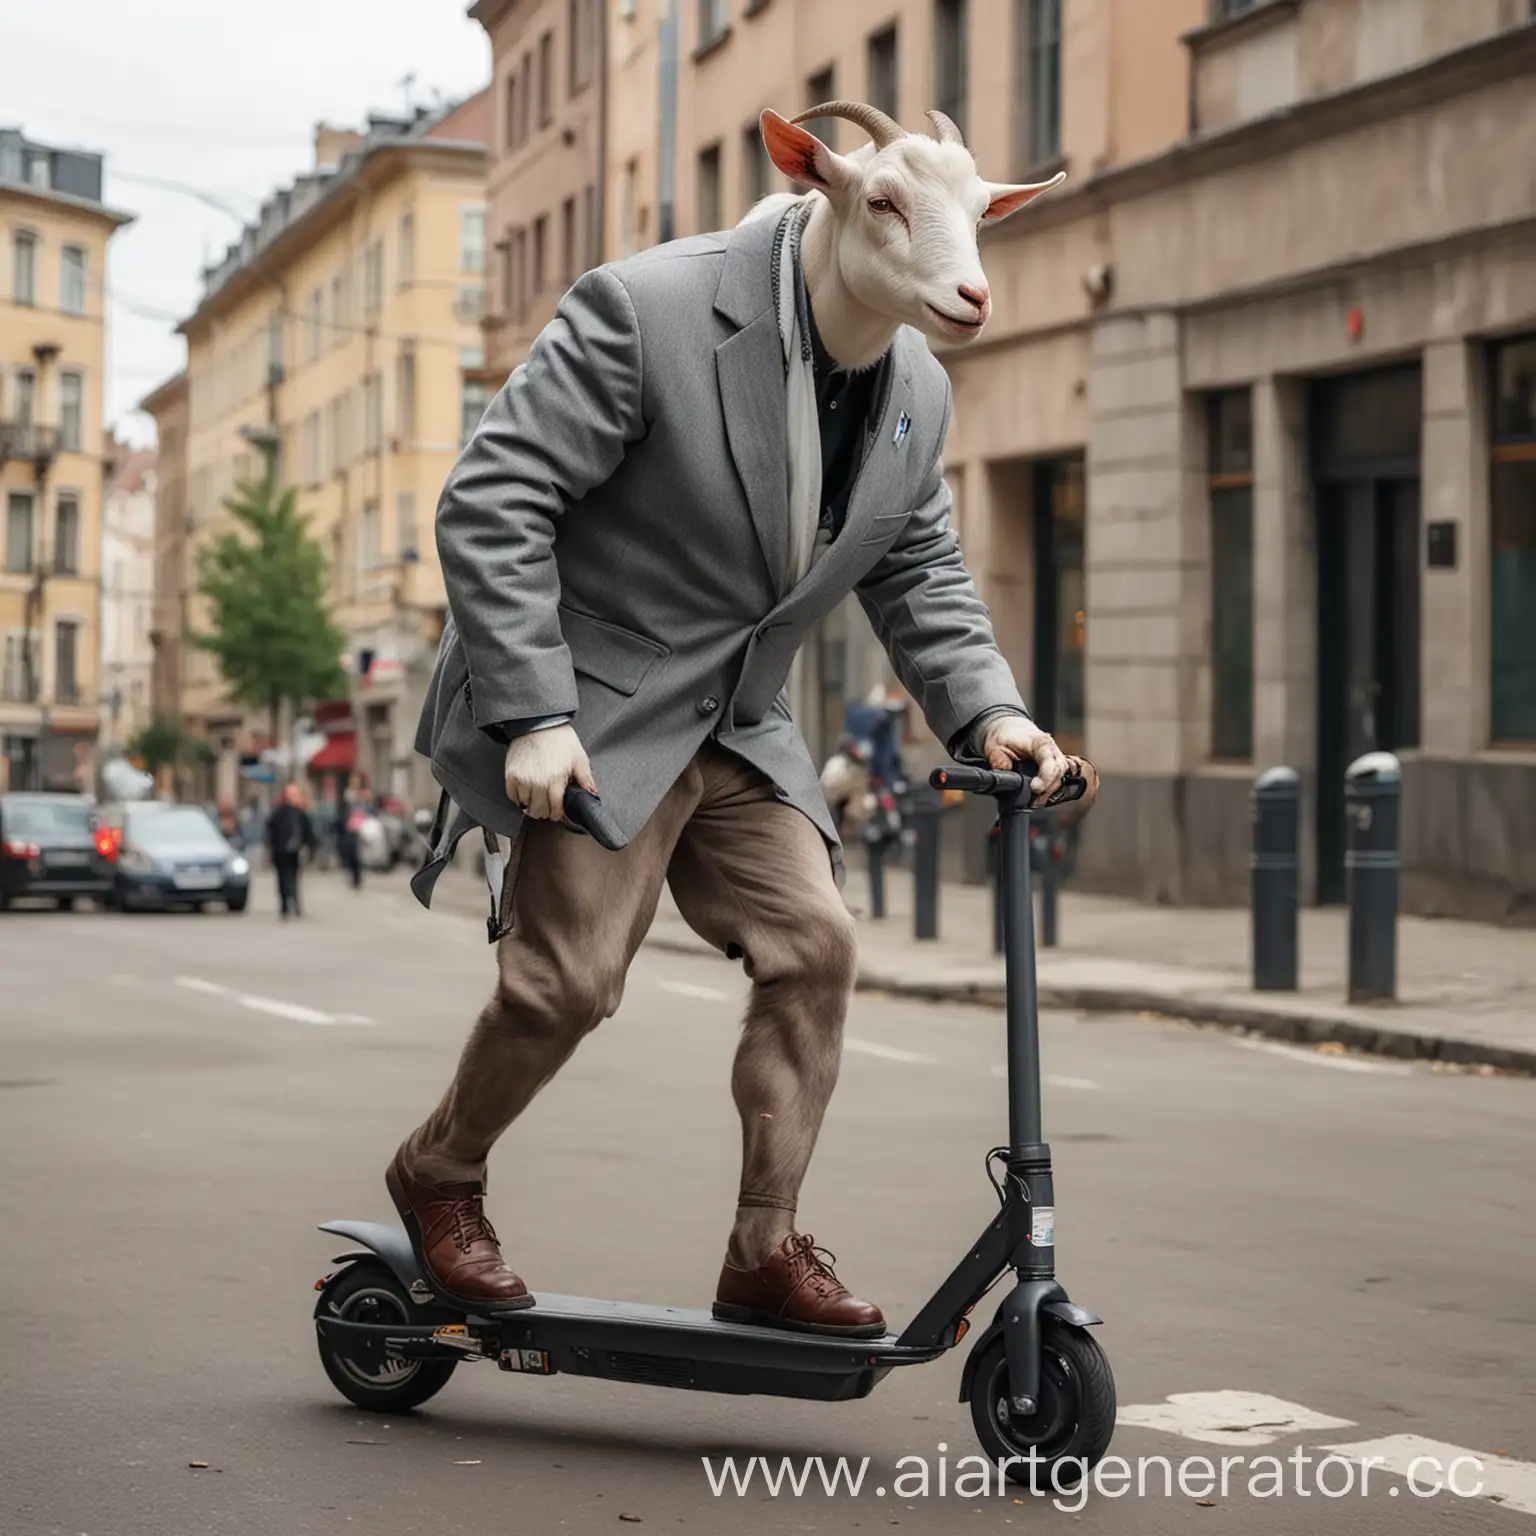 Bald-Goat-Riding-Electric-Scooter-with-Diplomat-in-Hand-Through-Urban-Streets